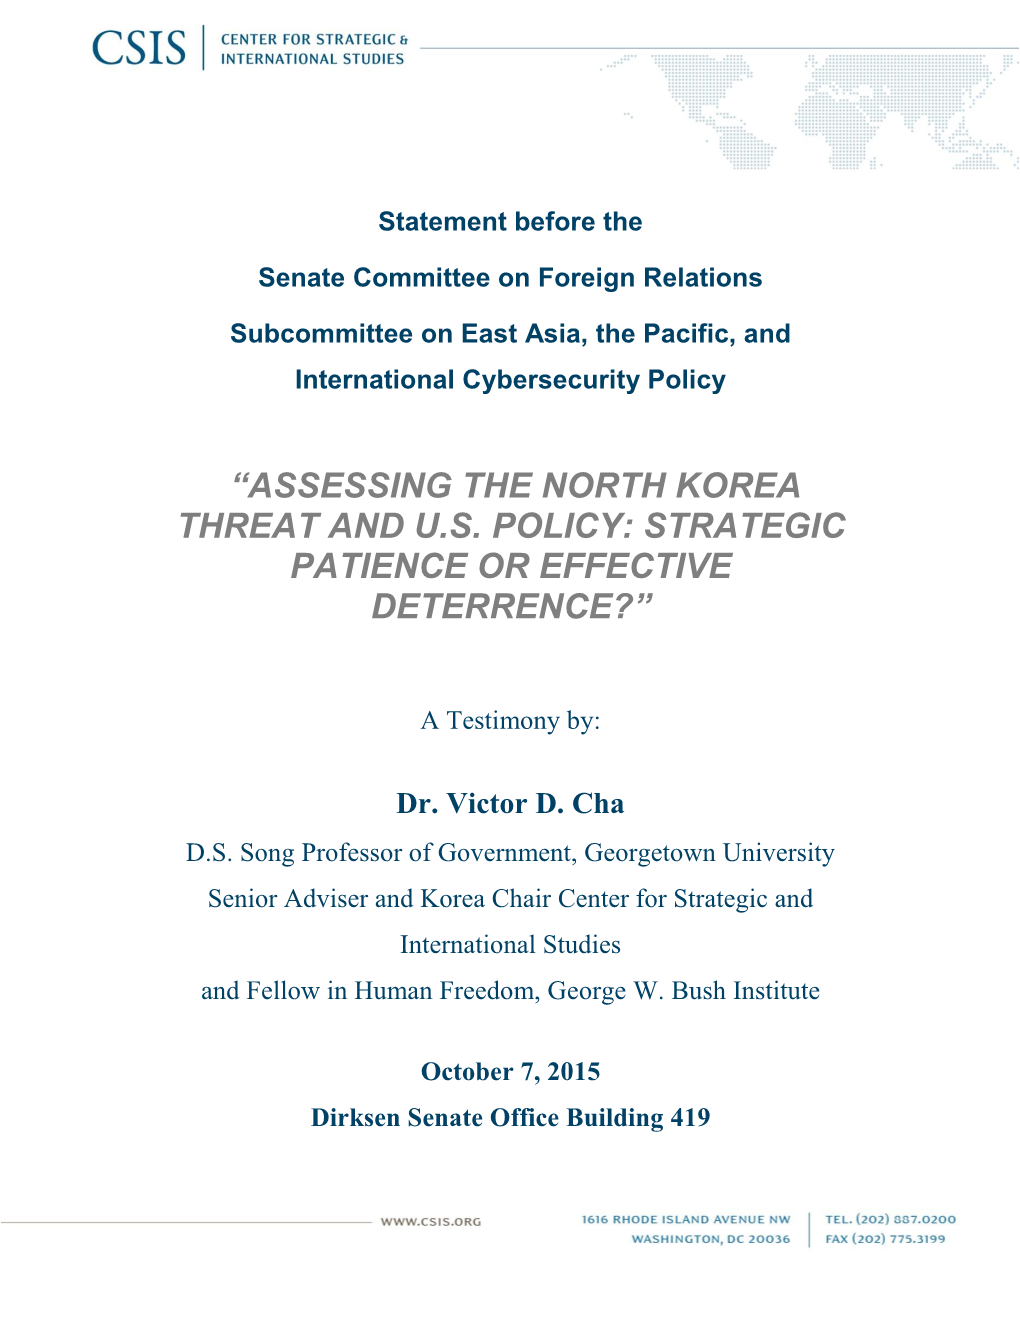 “Assessing the North Korea Threat and U.S. Policy: Strategic Patience Or Effective Deterrence?”